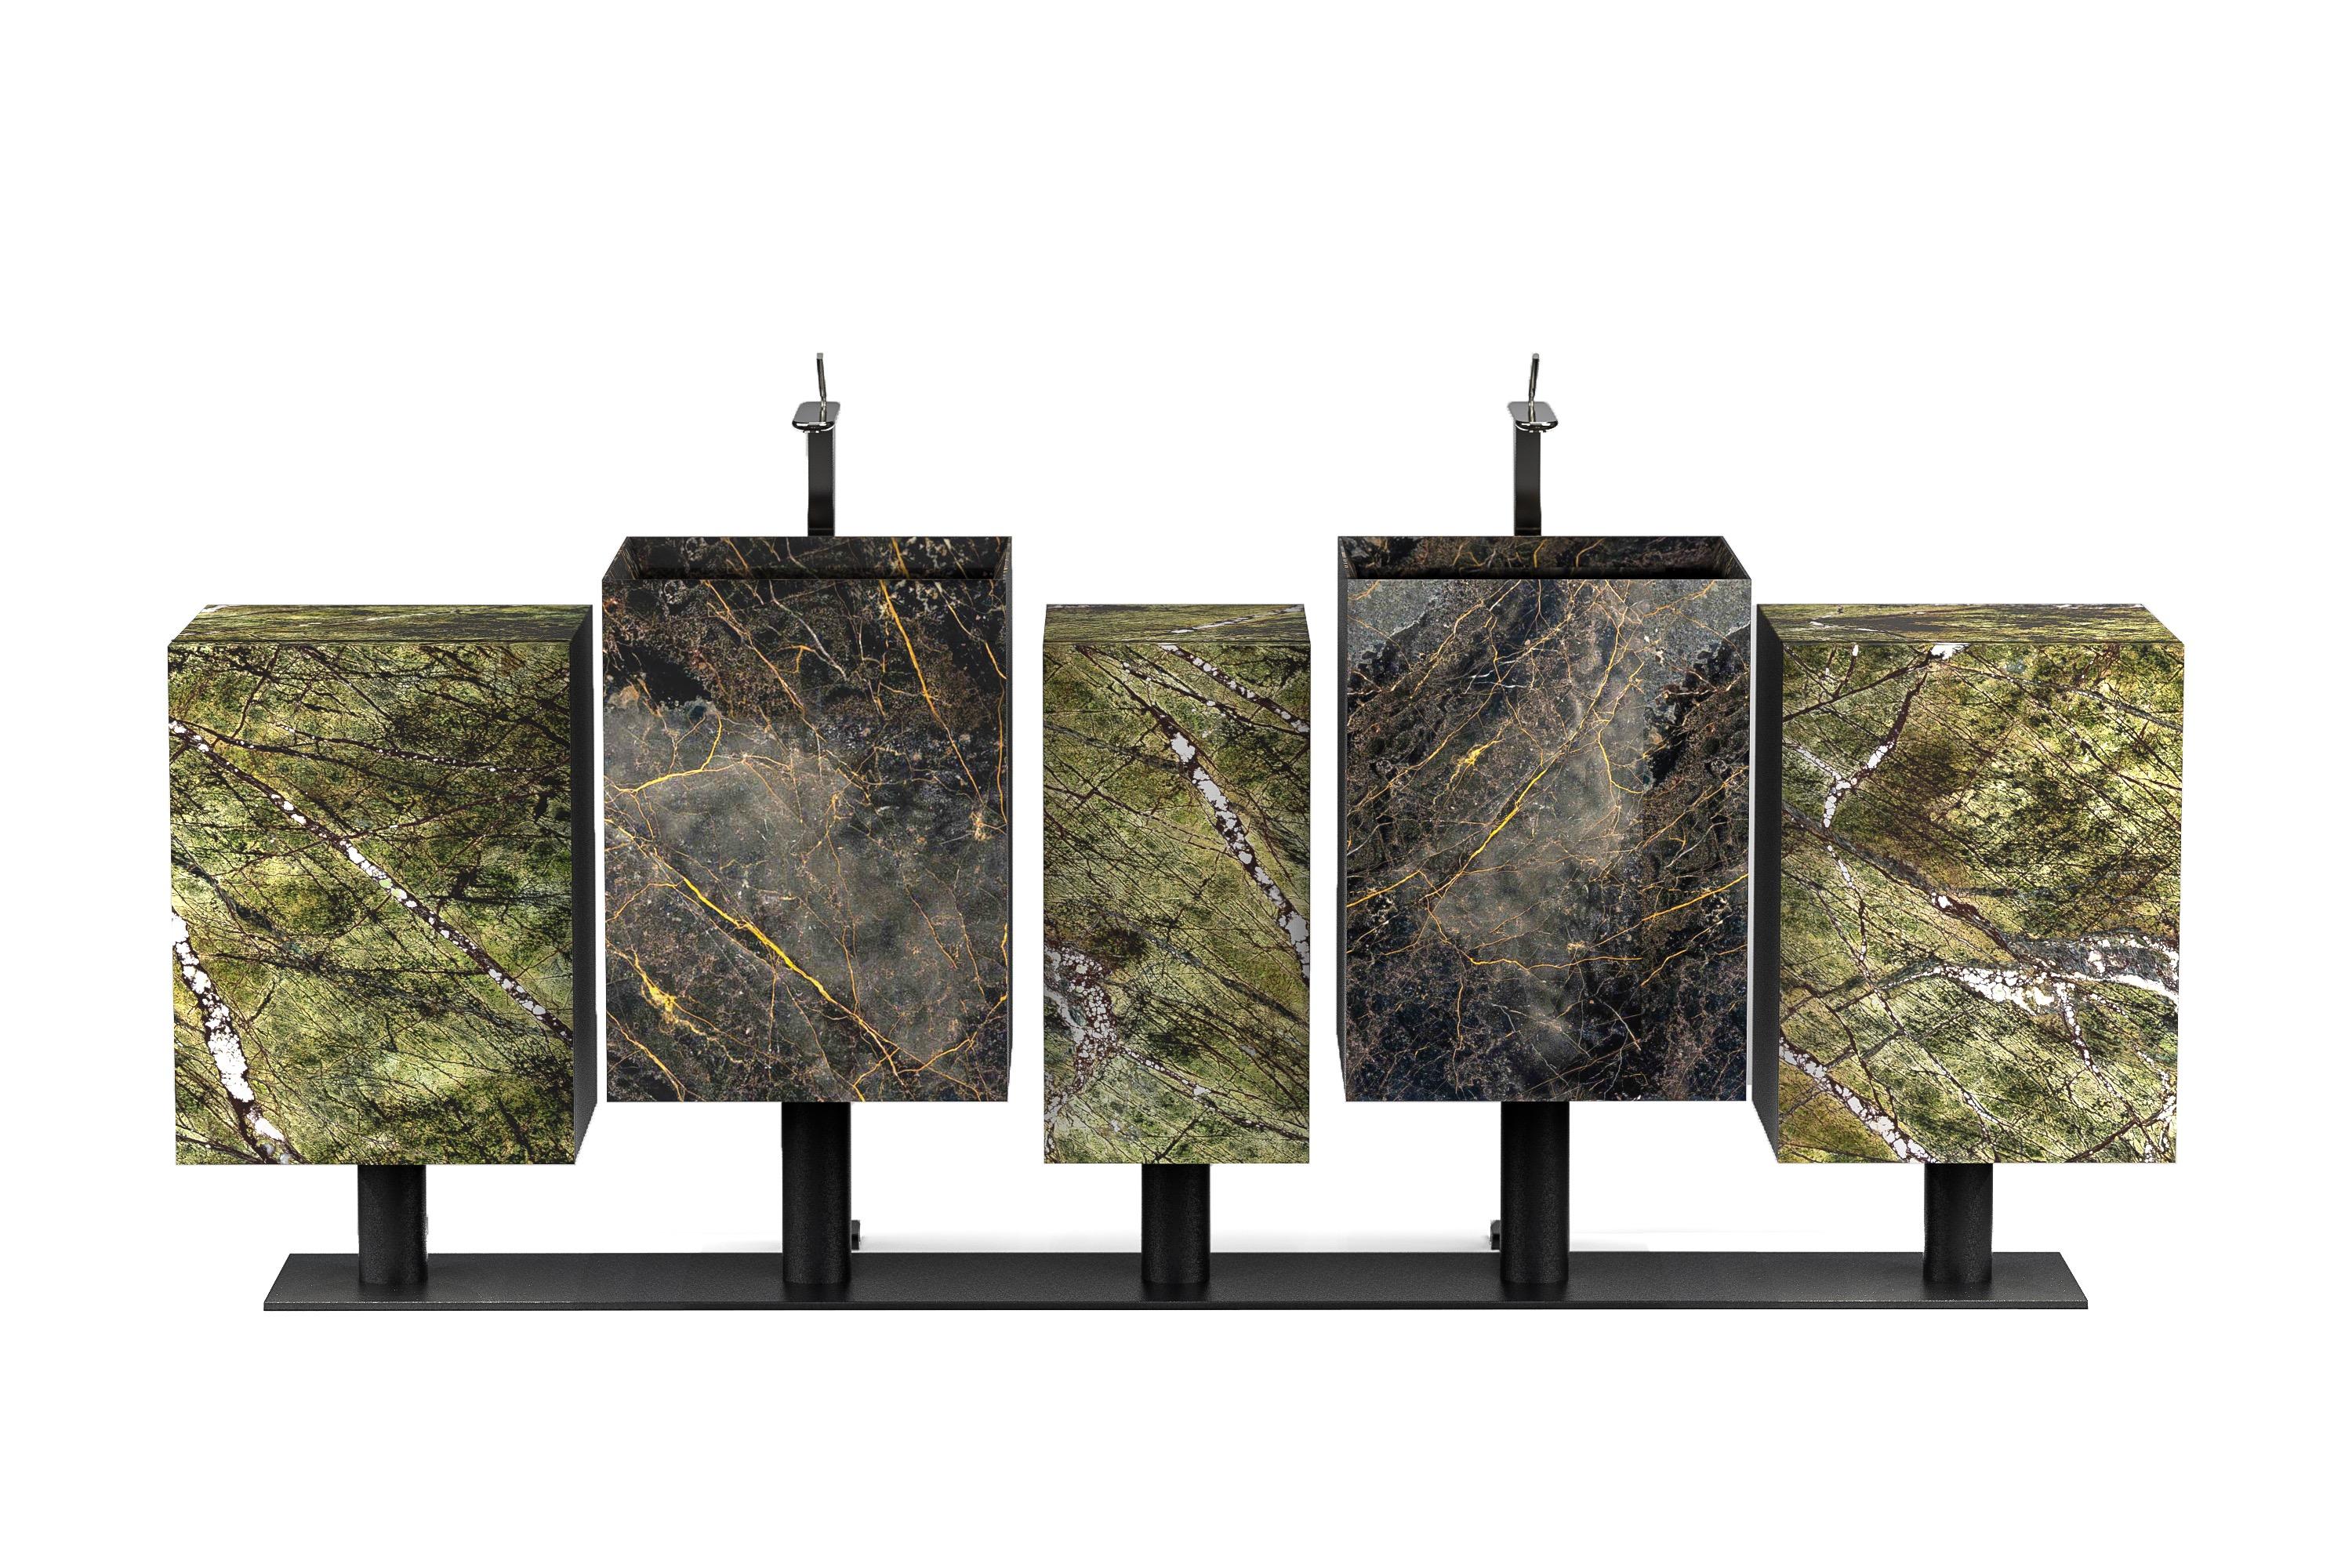 Cubi washbasin and cabinet by Marmi Serafini
Materials: Picasso green marble, port Saint Laurent marble, burnished metal.
Dimensions: D 45 x W 226 x H 85 cm
Available in other marbles.
Tap not included.

Clean, refined and functional bathroom